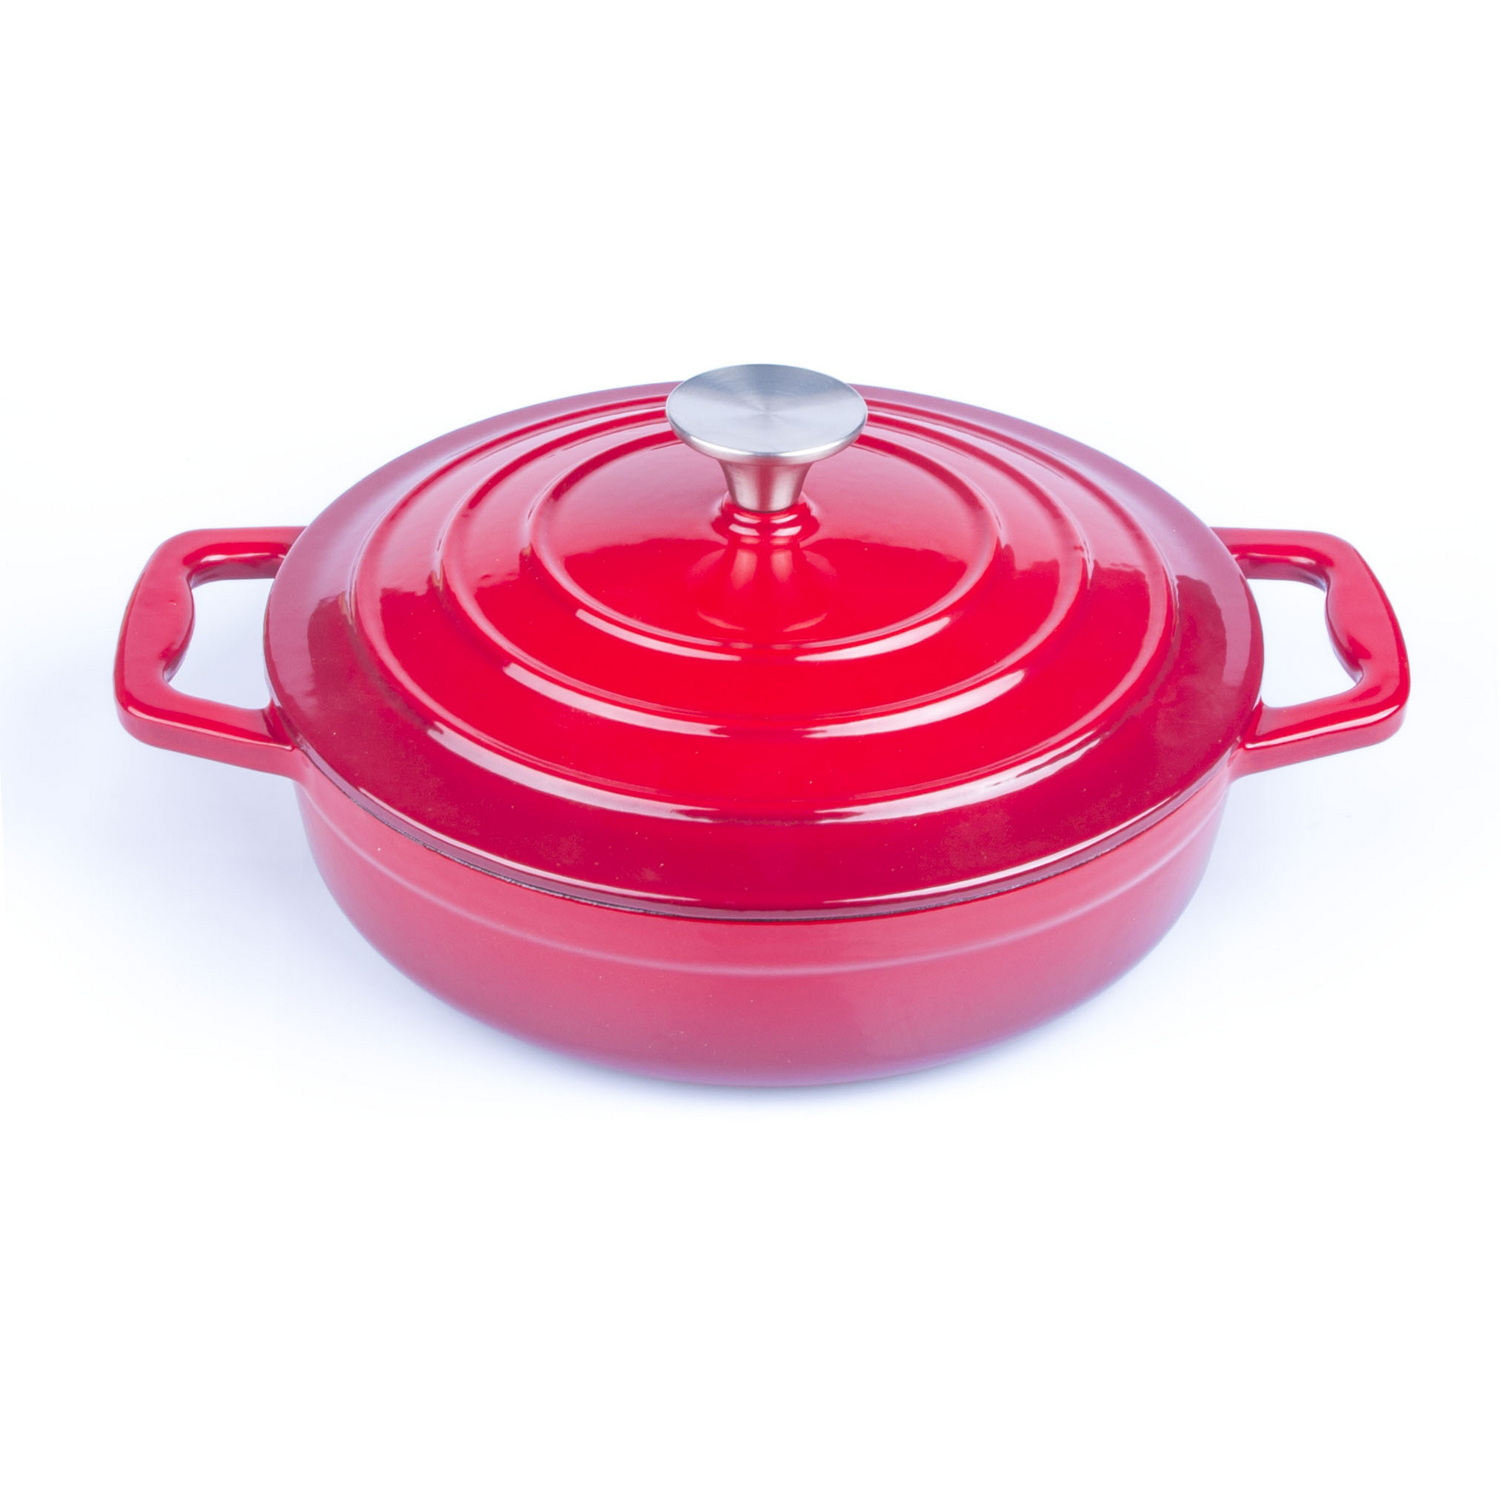 Enameled Cast Iron Cookware Casserole Braiser Pan, Round CastIron Skillet lid for Oven Red